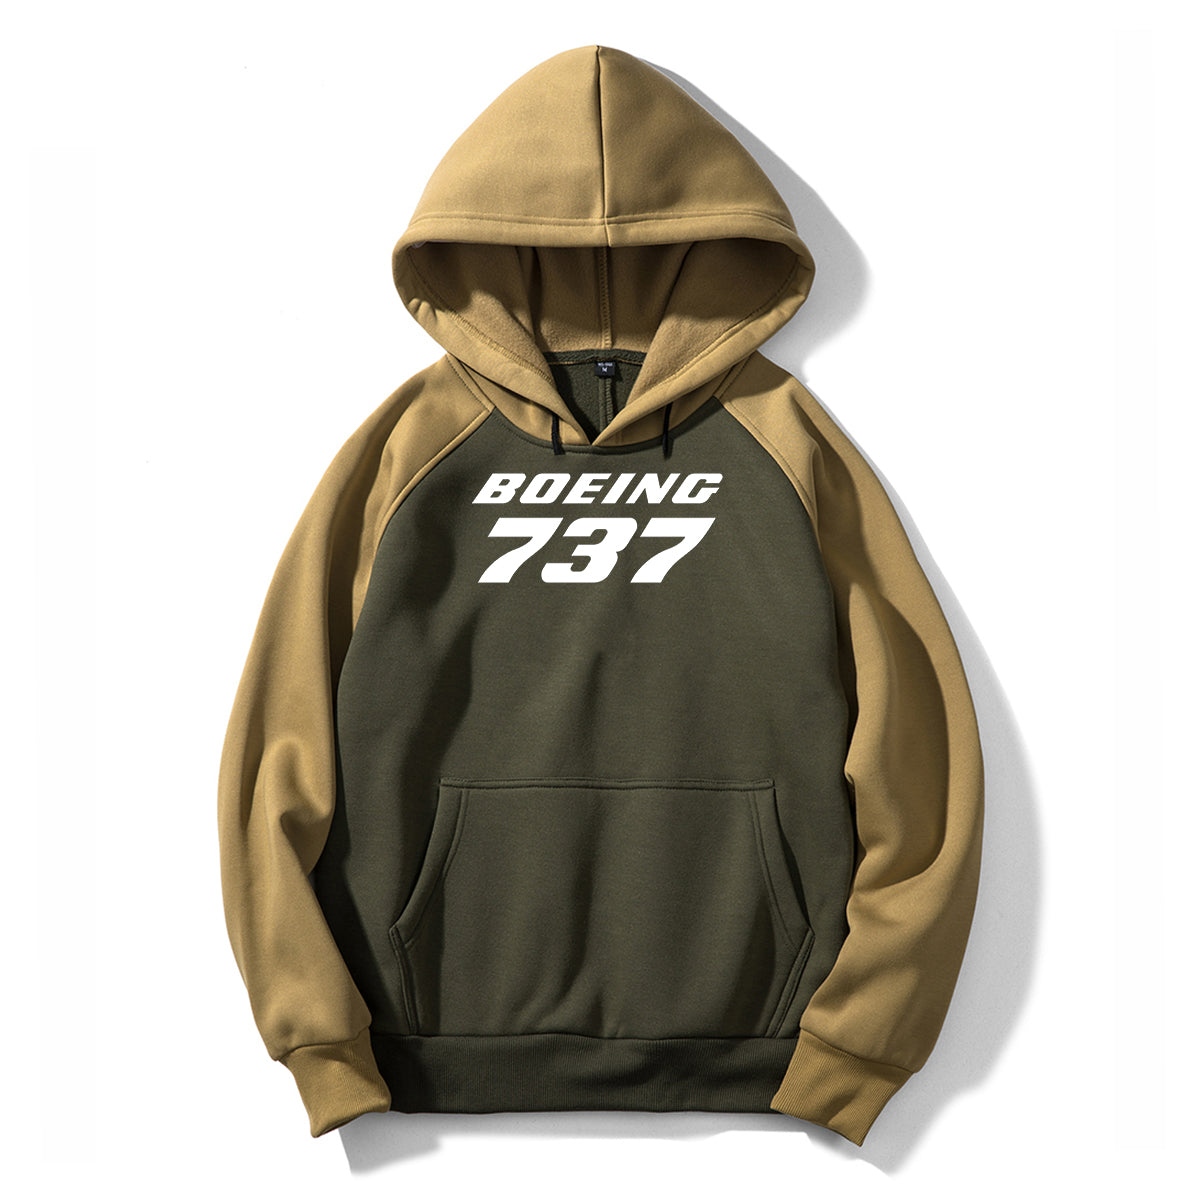 Boeing 737 & Text Designed Colourful Hoodies